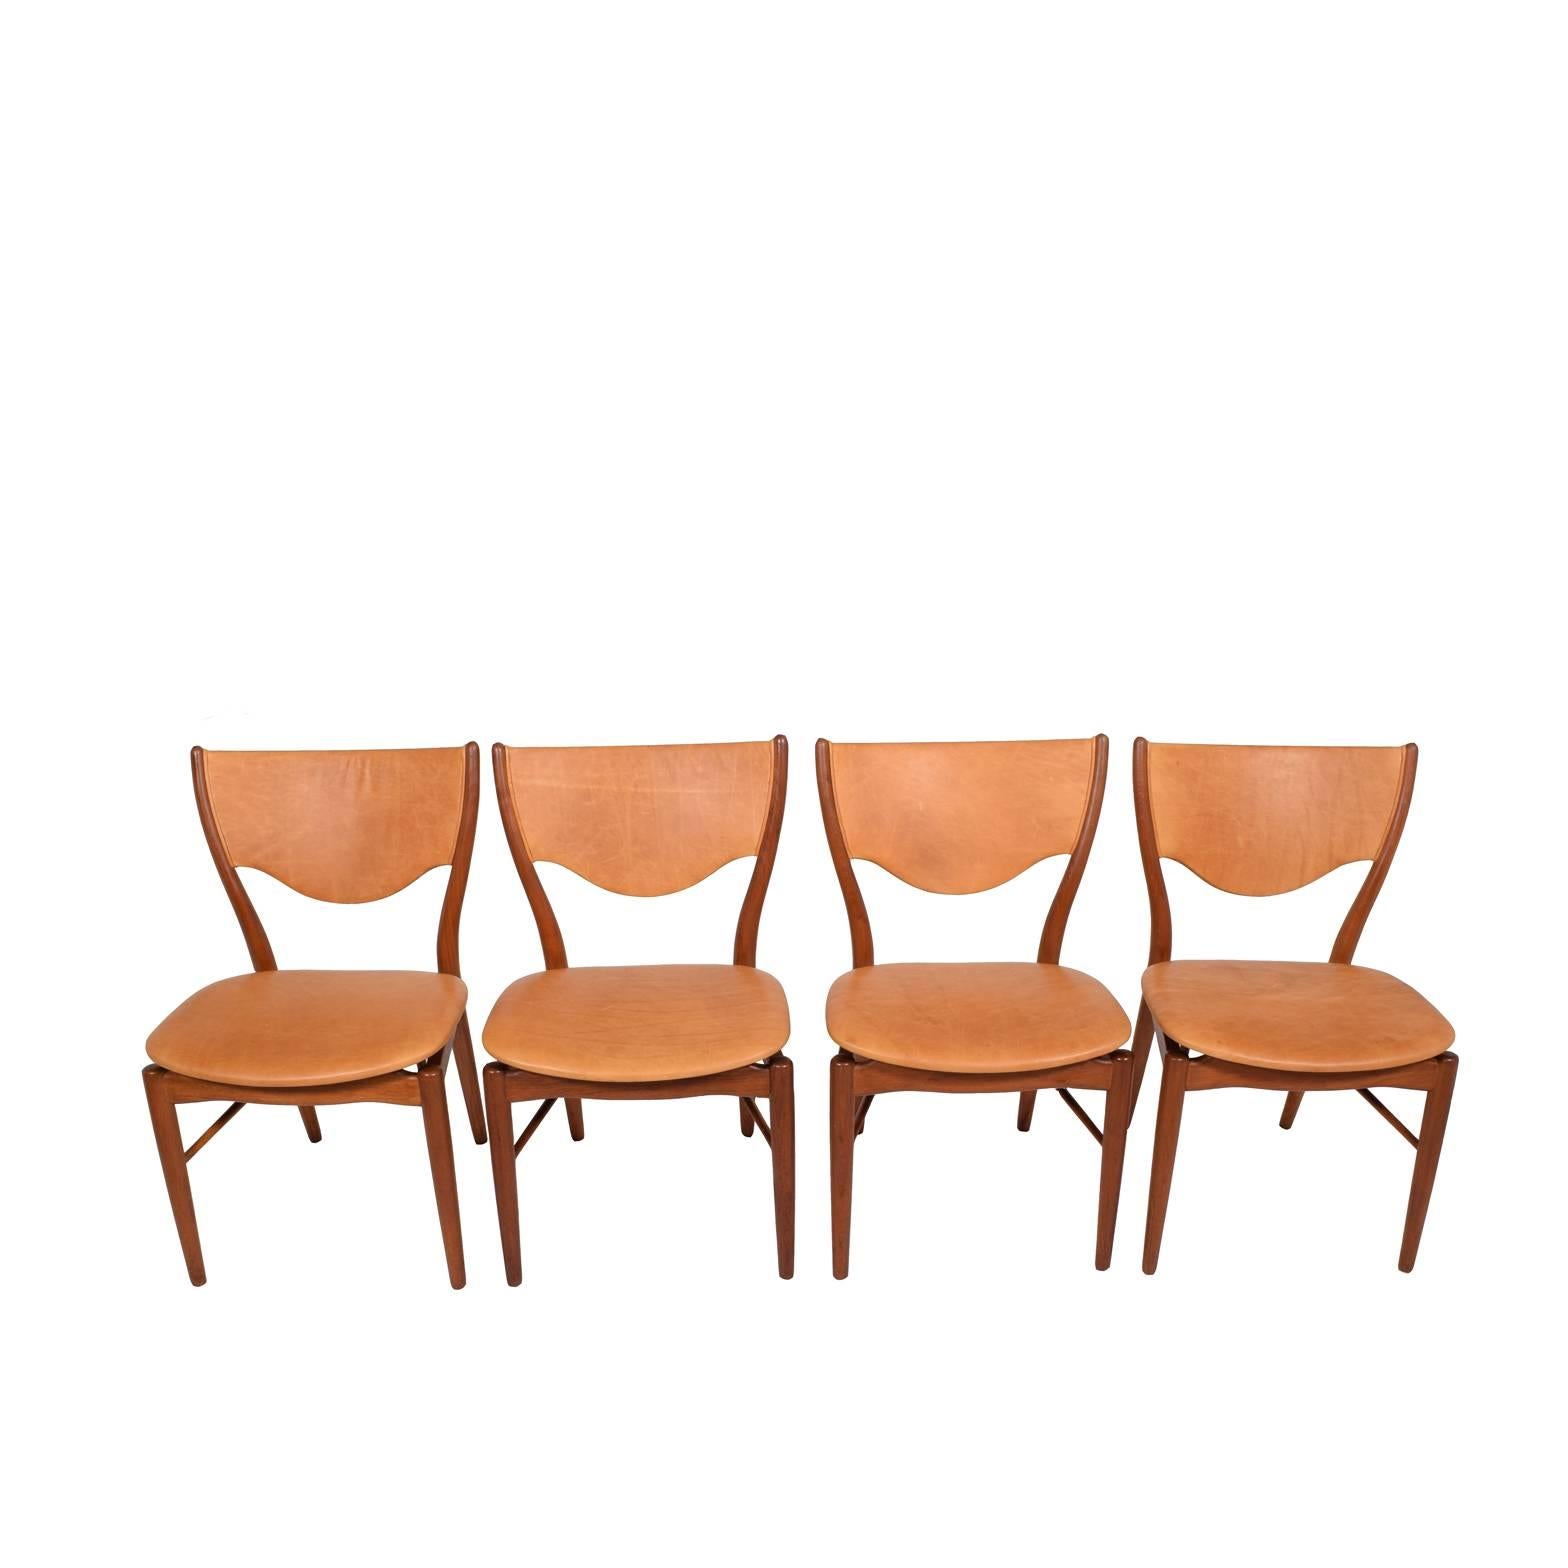 Four solid teak frame and patinated natural leather upholstered side chairs. Designed in 1952 for Bovirke, Denmark. Ink stamp to lower stretcher.